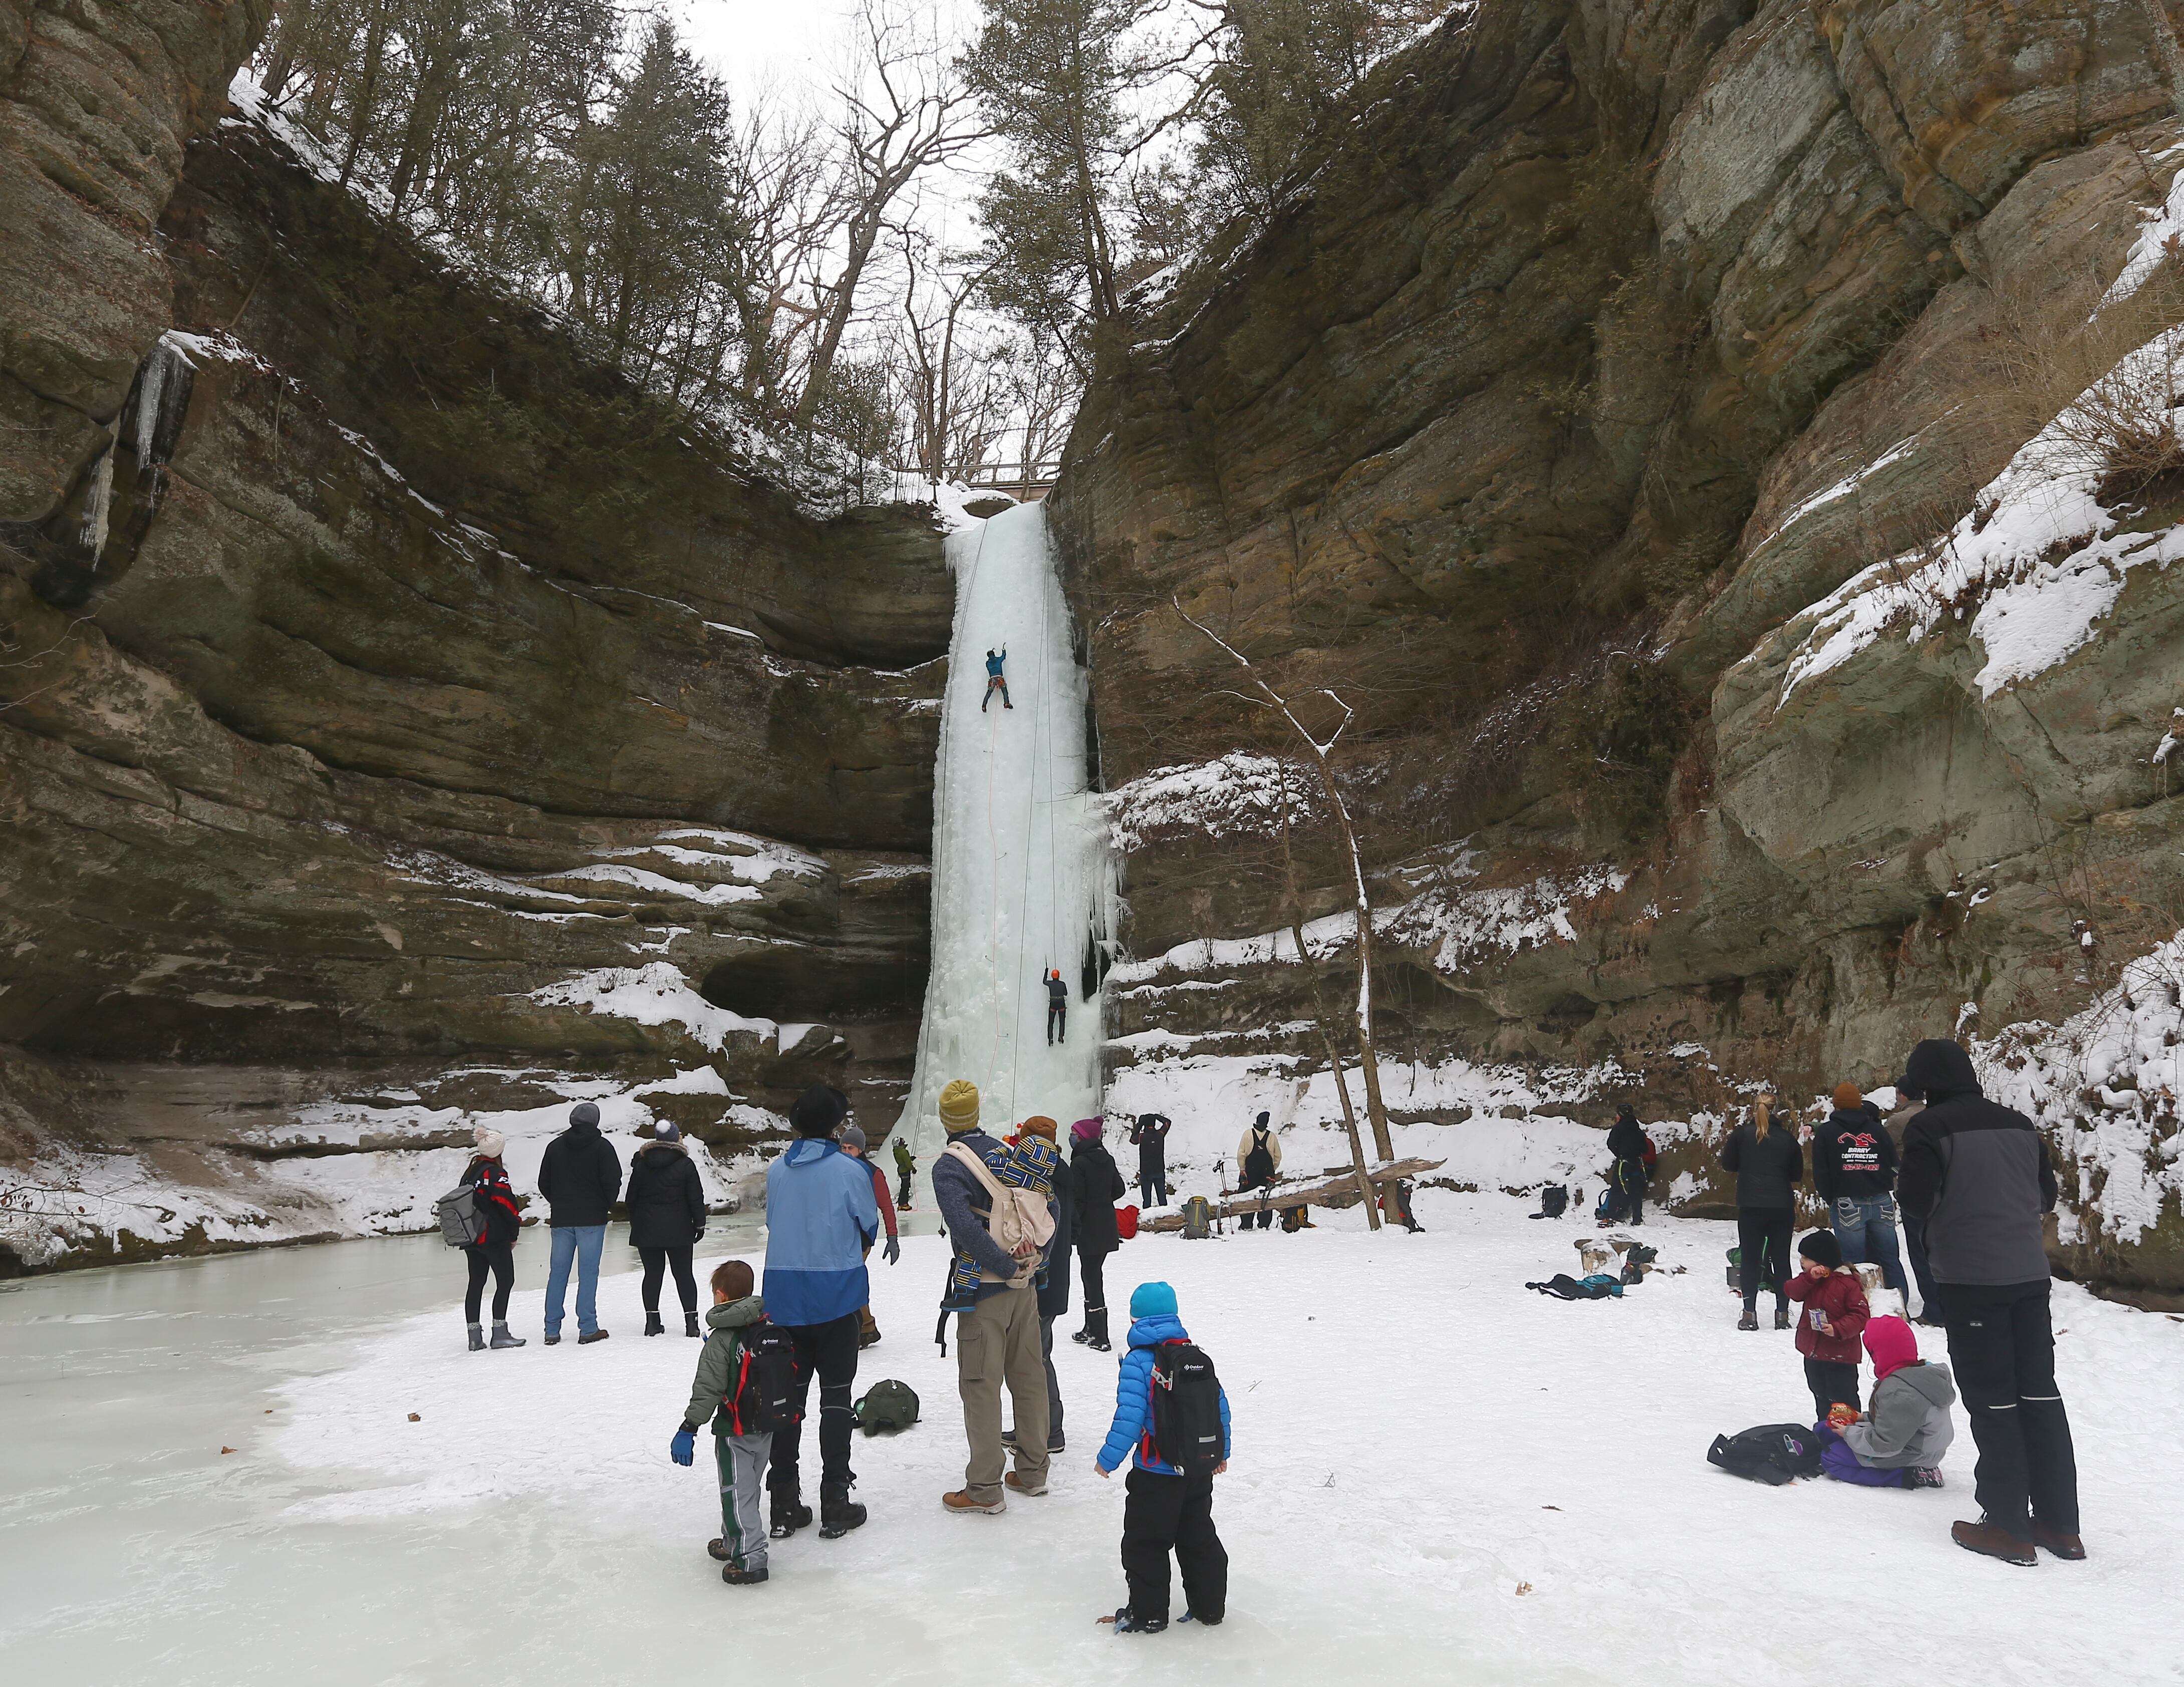 Climbers climb an ice fall at Wildcat Canyon as speectators watch in Starved Rock State Park on Sunday Feb. 21, 2021.